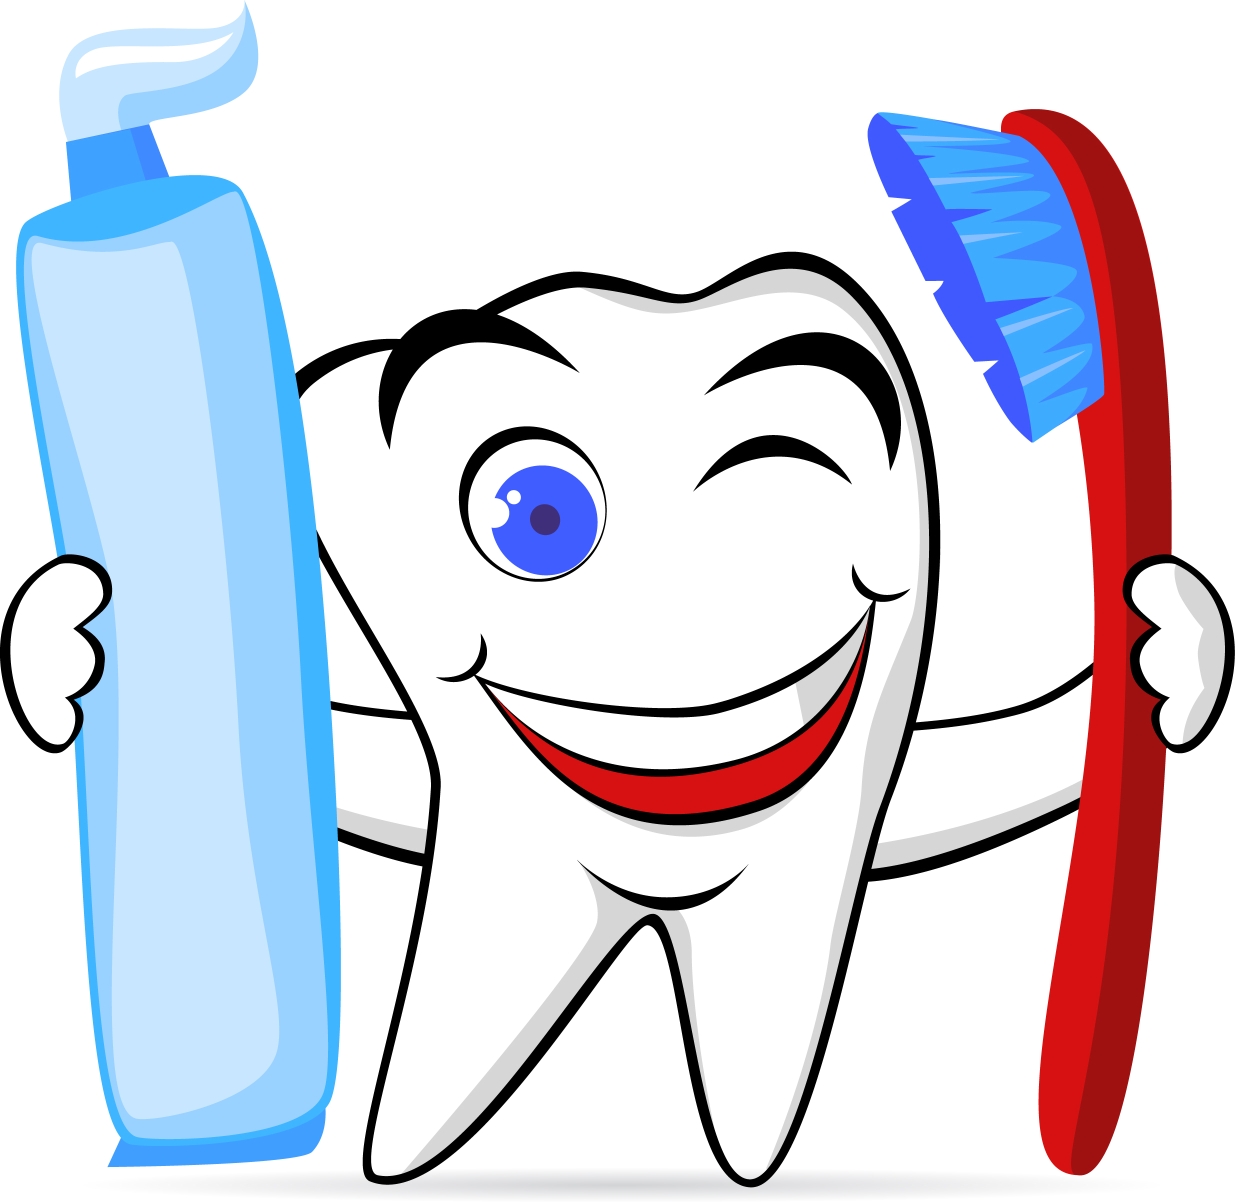 Tooth cavities in teeth clipart free clip art image image